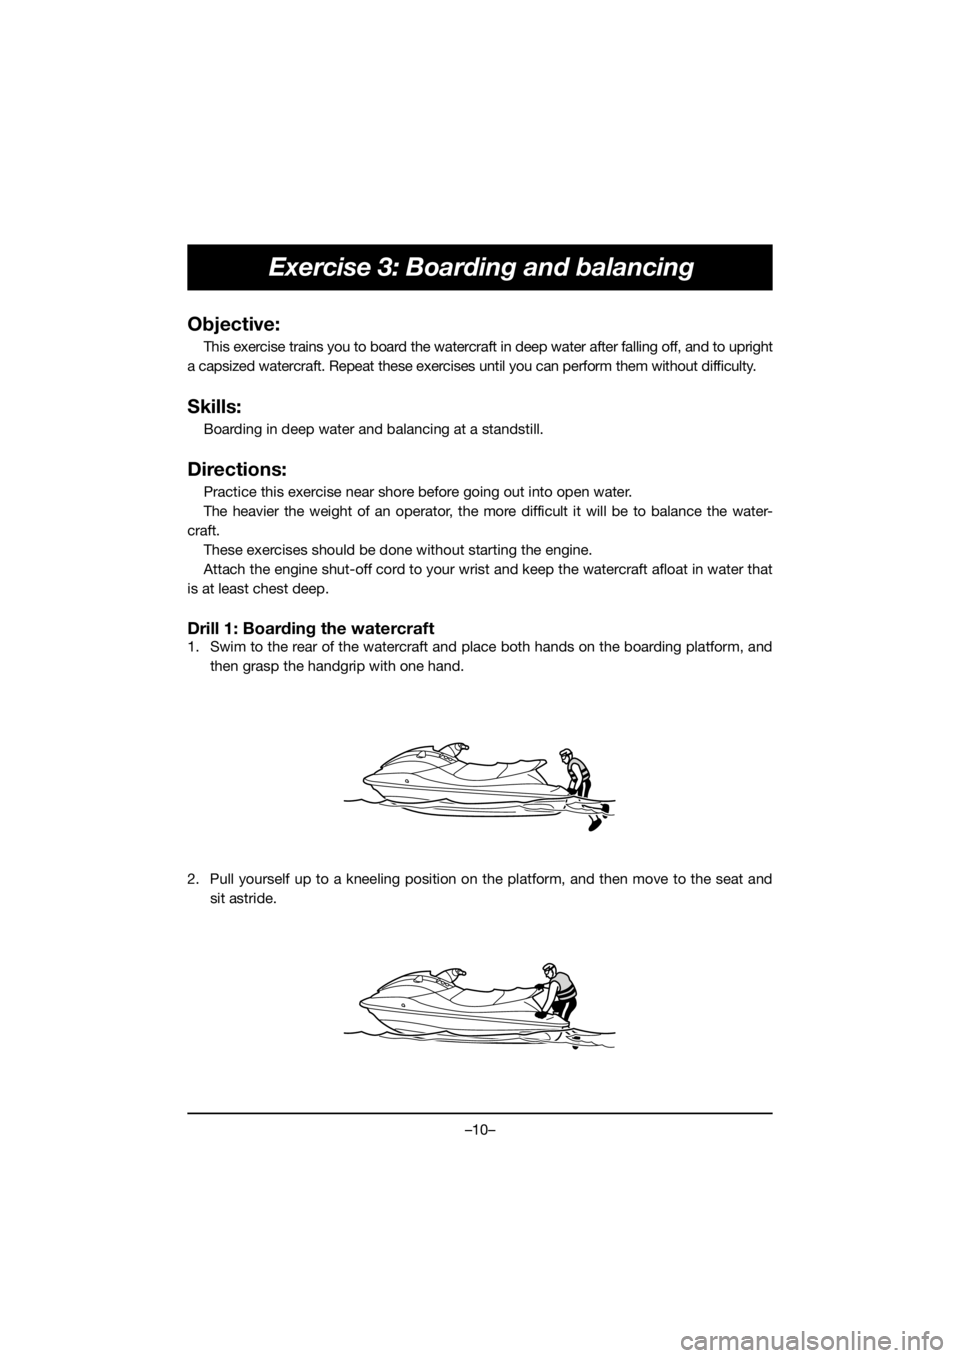 YAMAHA VX CRUISER HO 2020  Betriebsanleitungen (in German) –10–
Exercise 3: Boarding and balancing
Objective:
This exercise trains you to board the watercraft in deep water after falling off, and to upright
a capsized watercraft. Repeat these exercises un